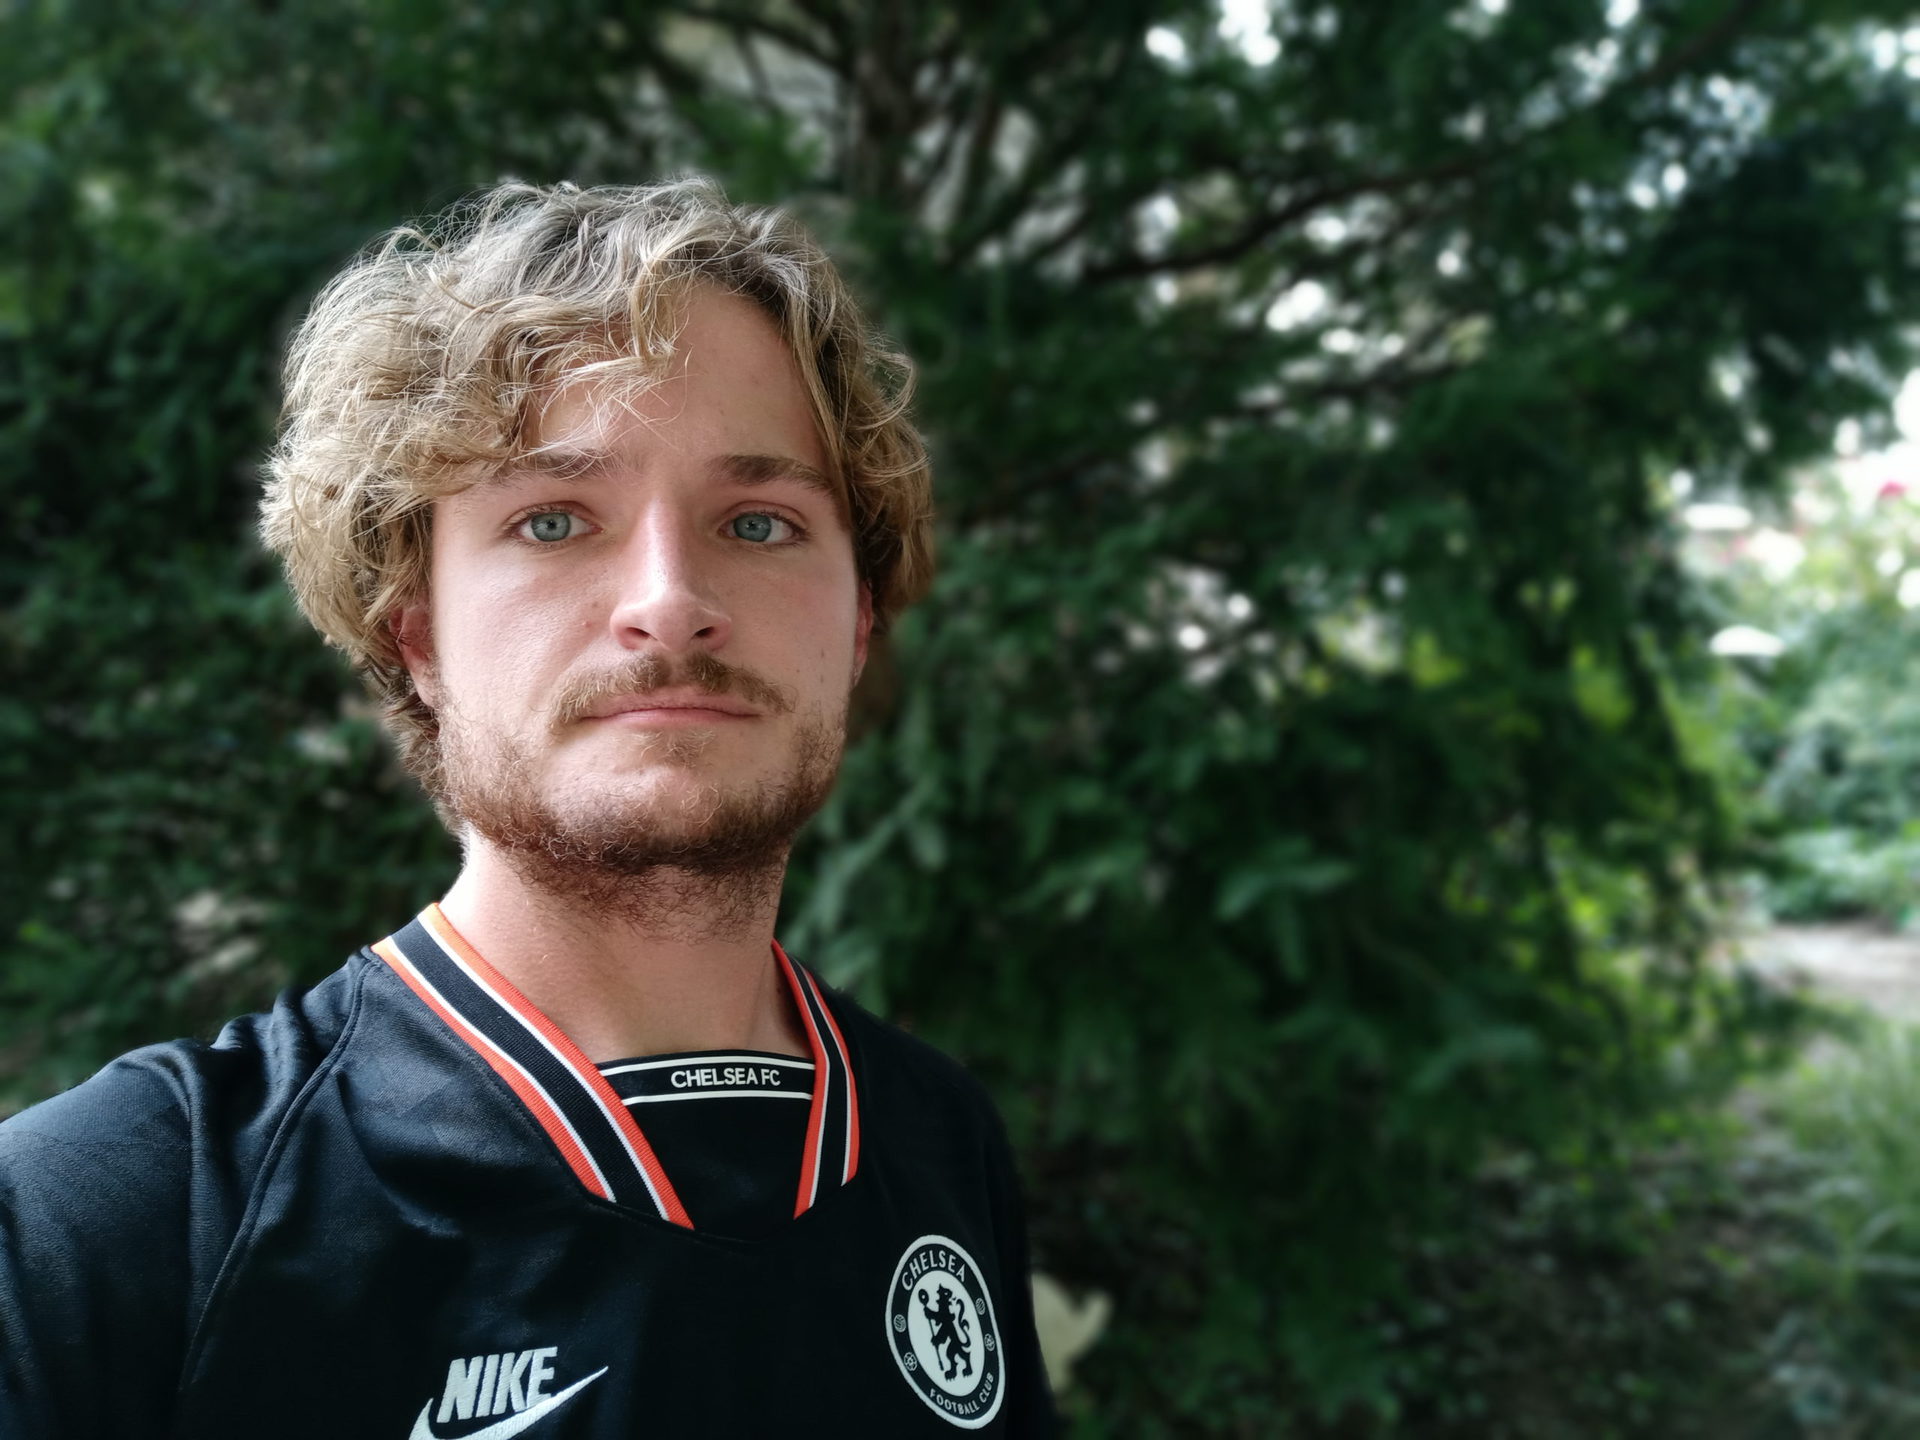 LG Stylo 6 portrait selfie of a man with blonde curly hair and facial hair, wearing a dark coloured top.